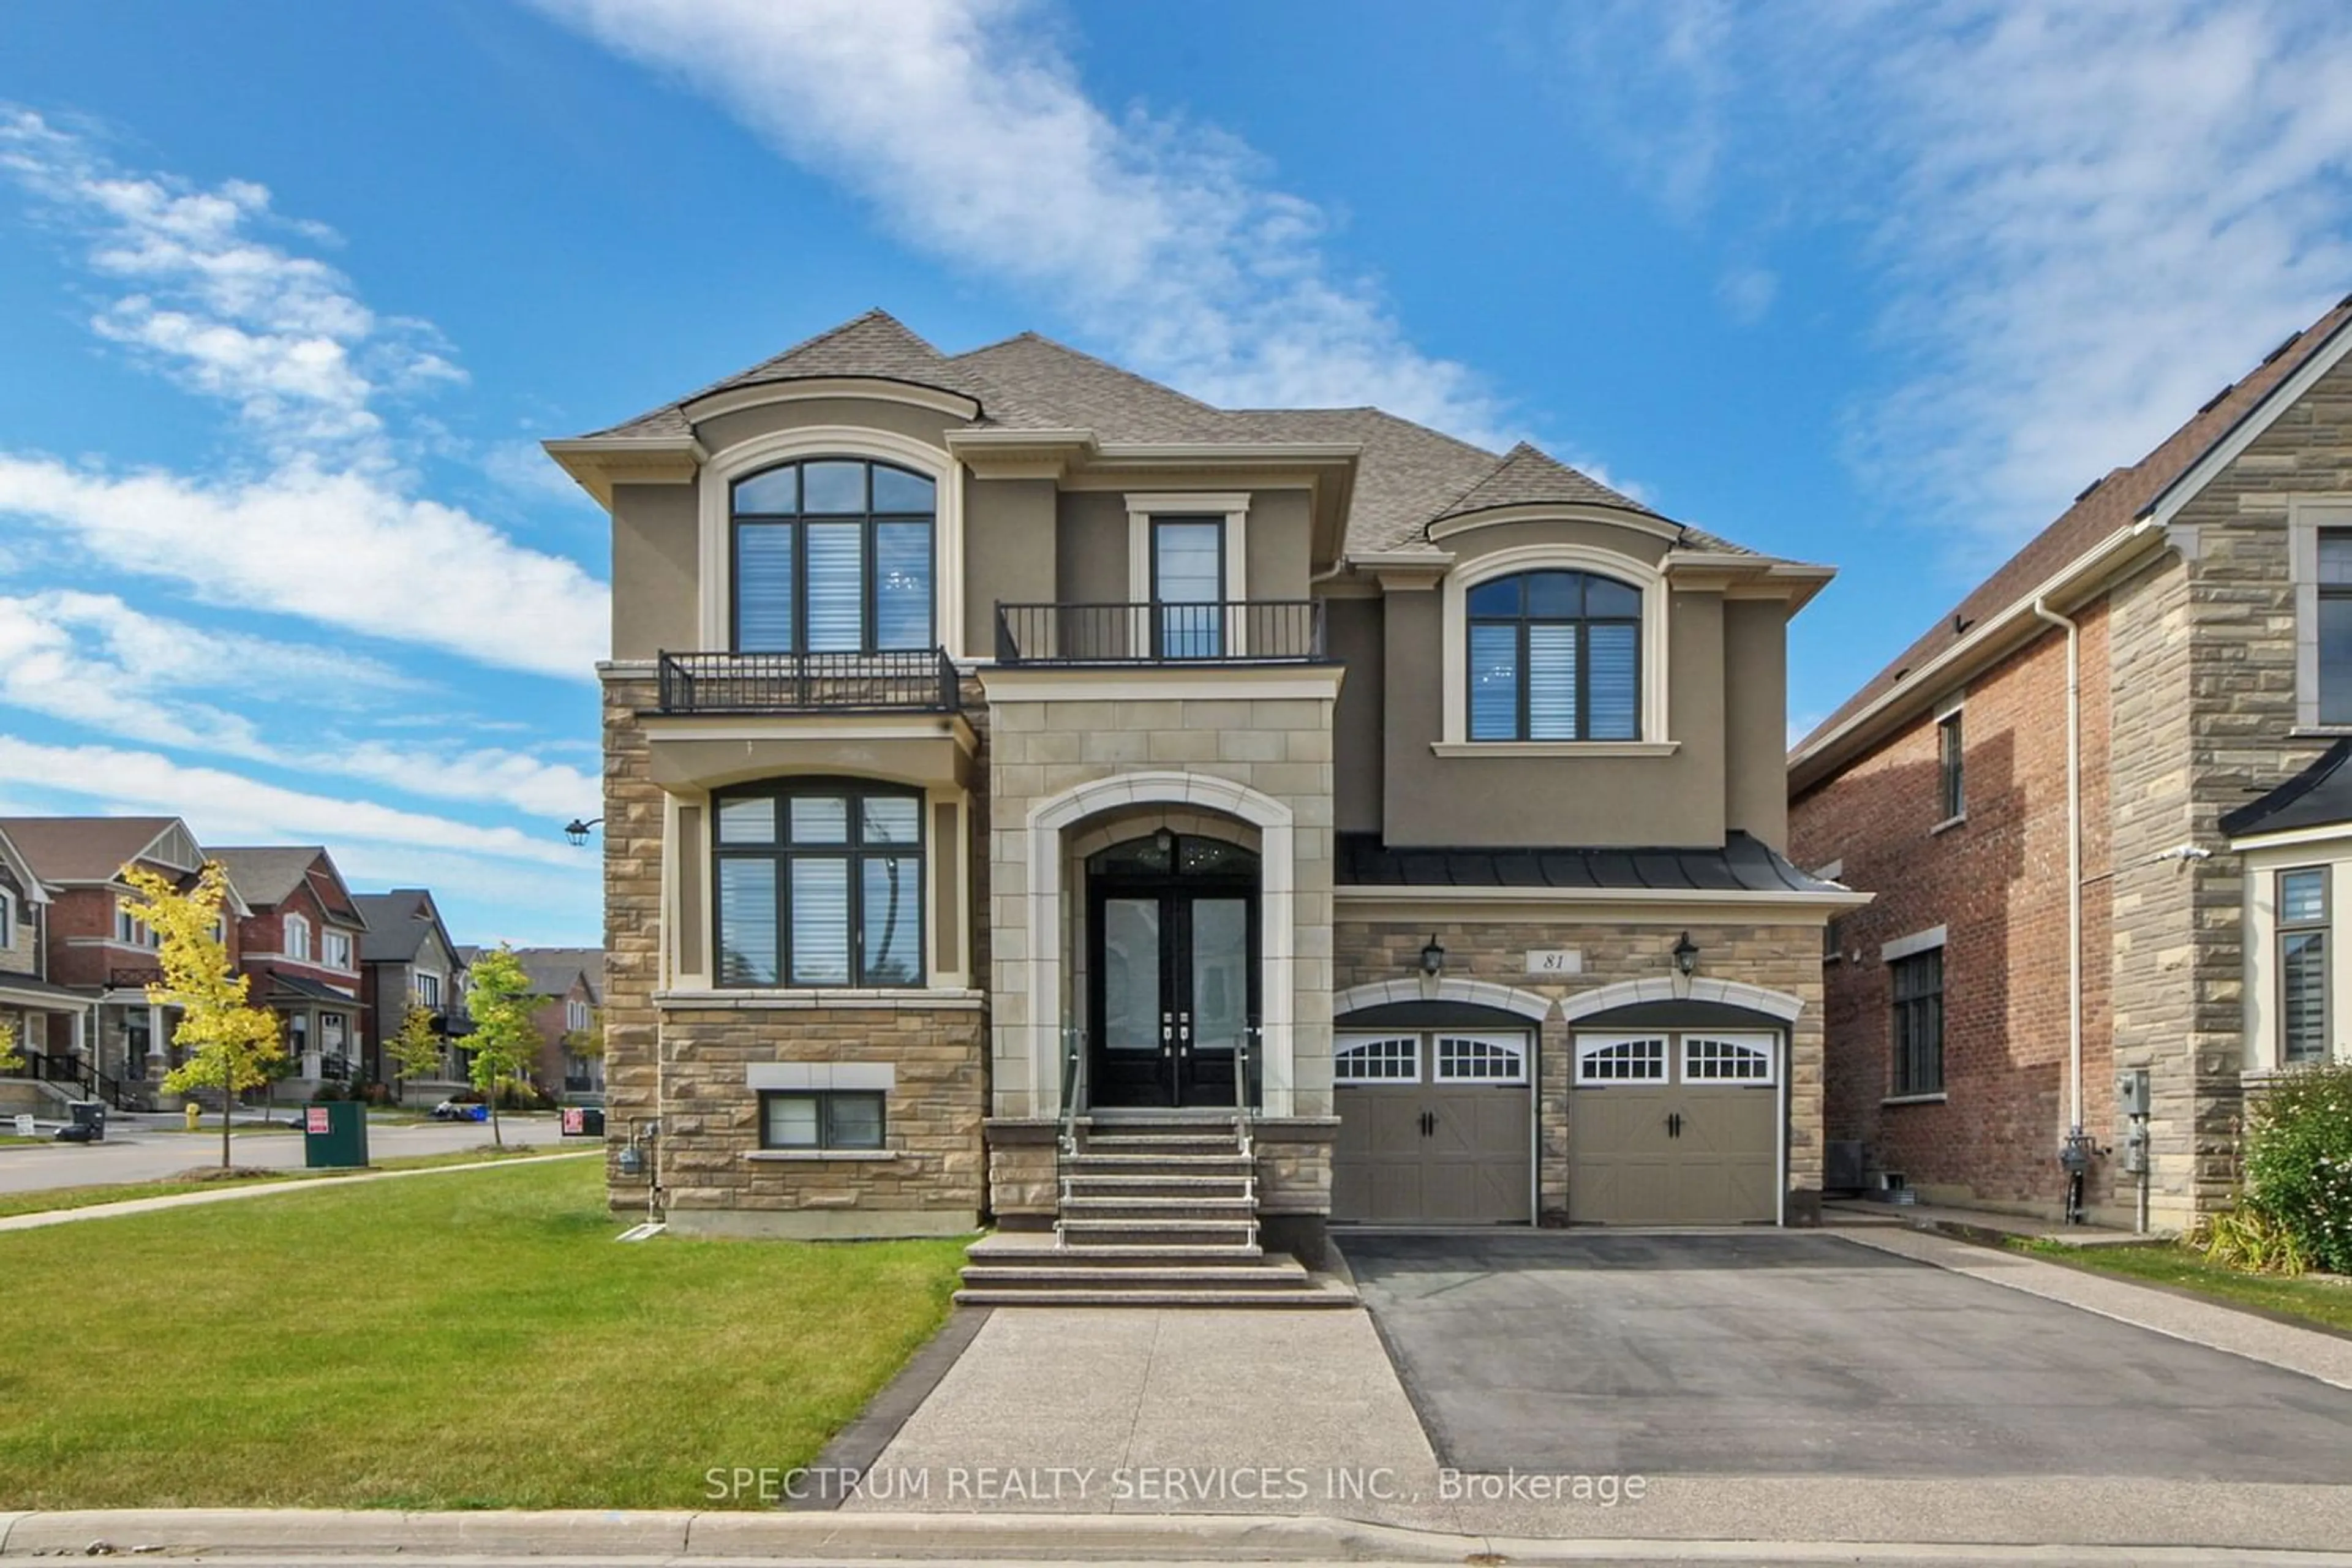 Home with brick exterior material for 81 Ridgepoint Rd, Vaughan Ontario L4H 4T3